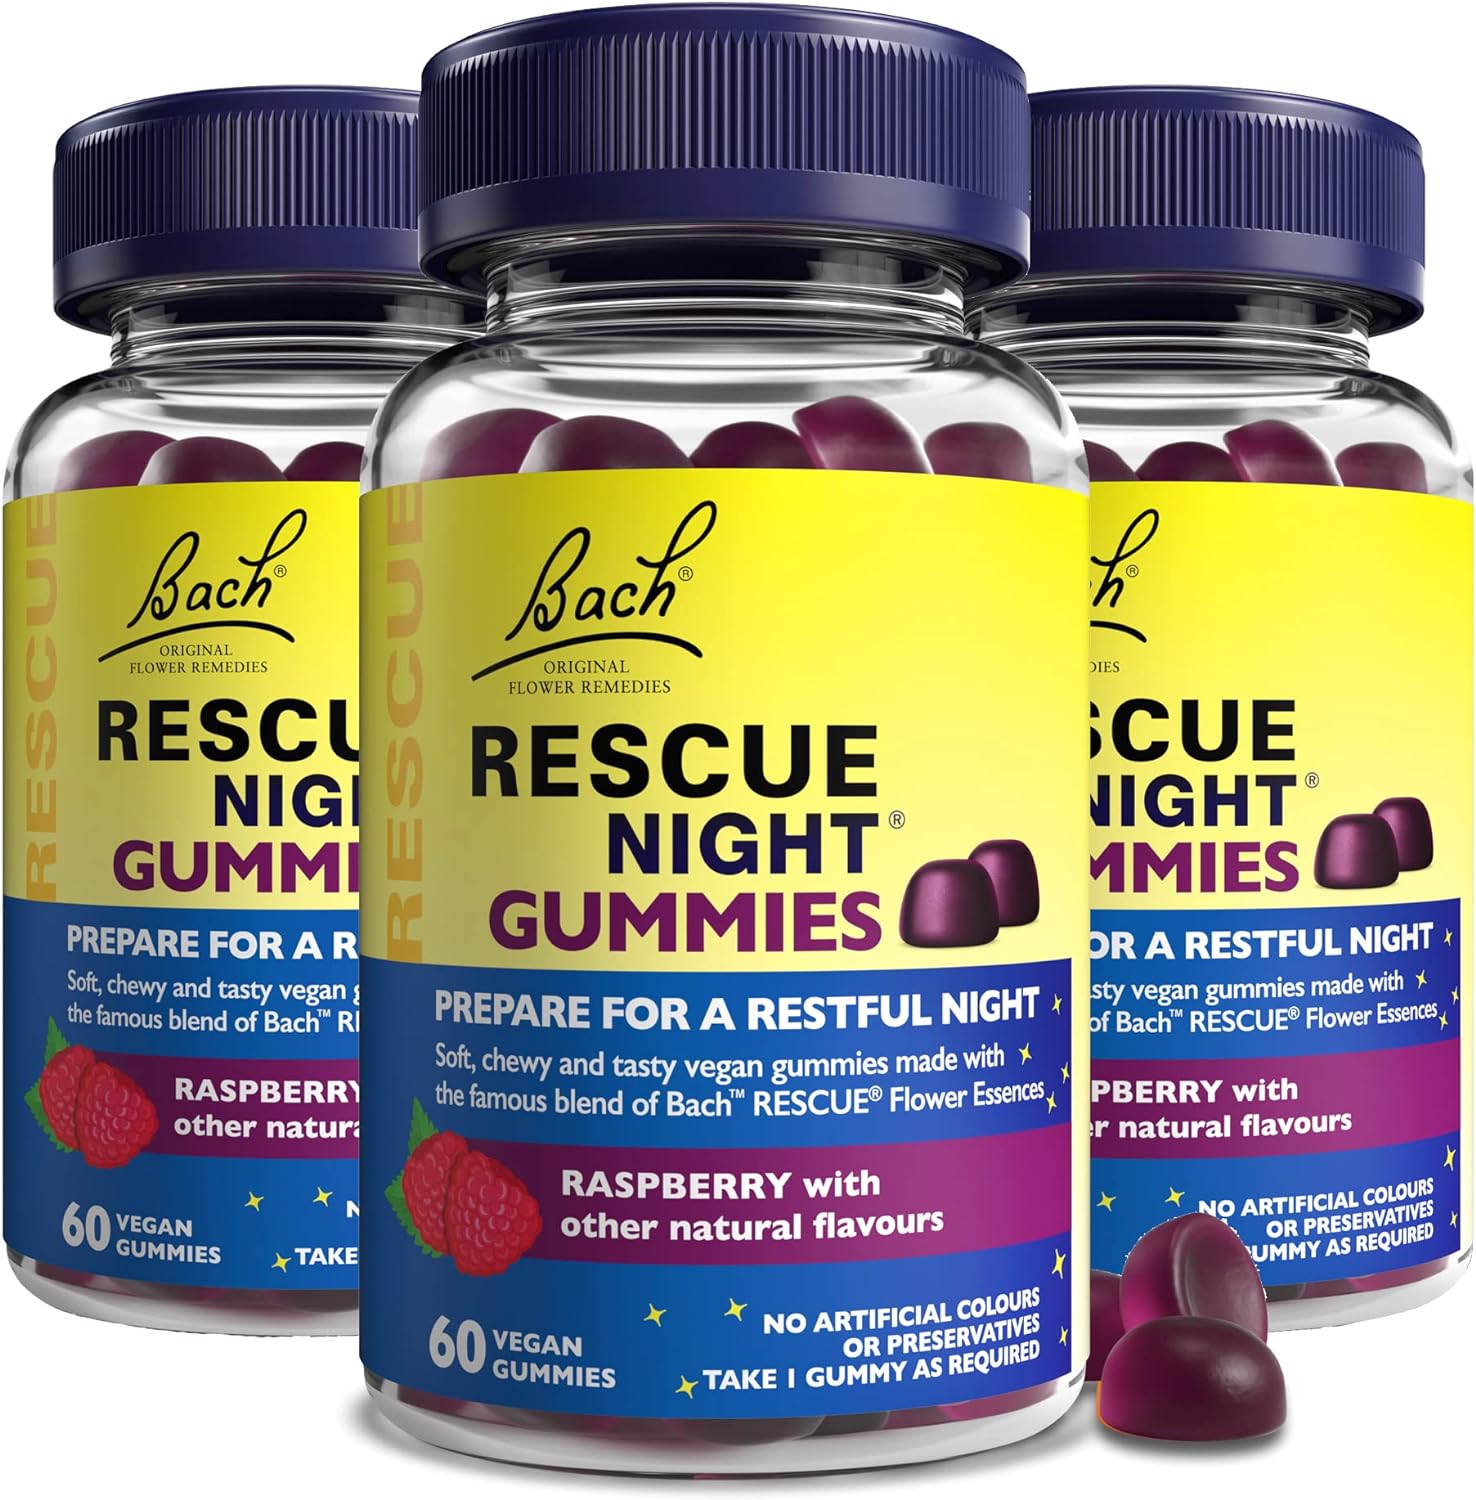 Rescue Remedy Gummies Night 3 Pack Bundle, for A Serene Sleep, with Ra660 Grams